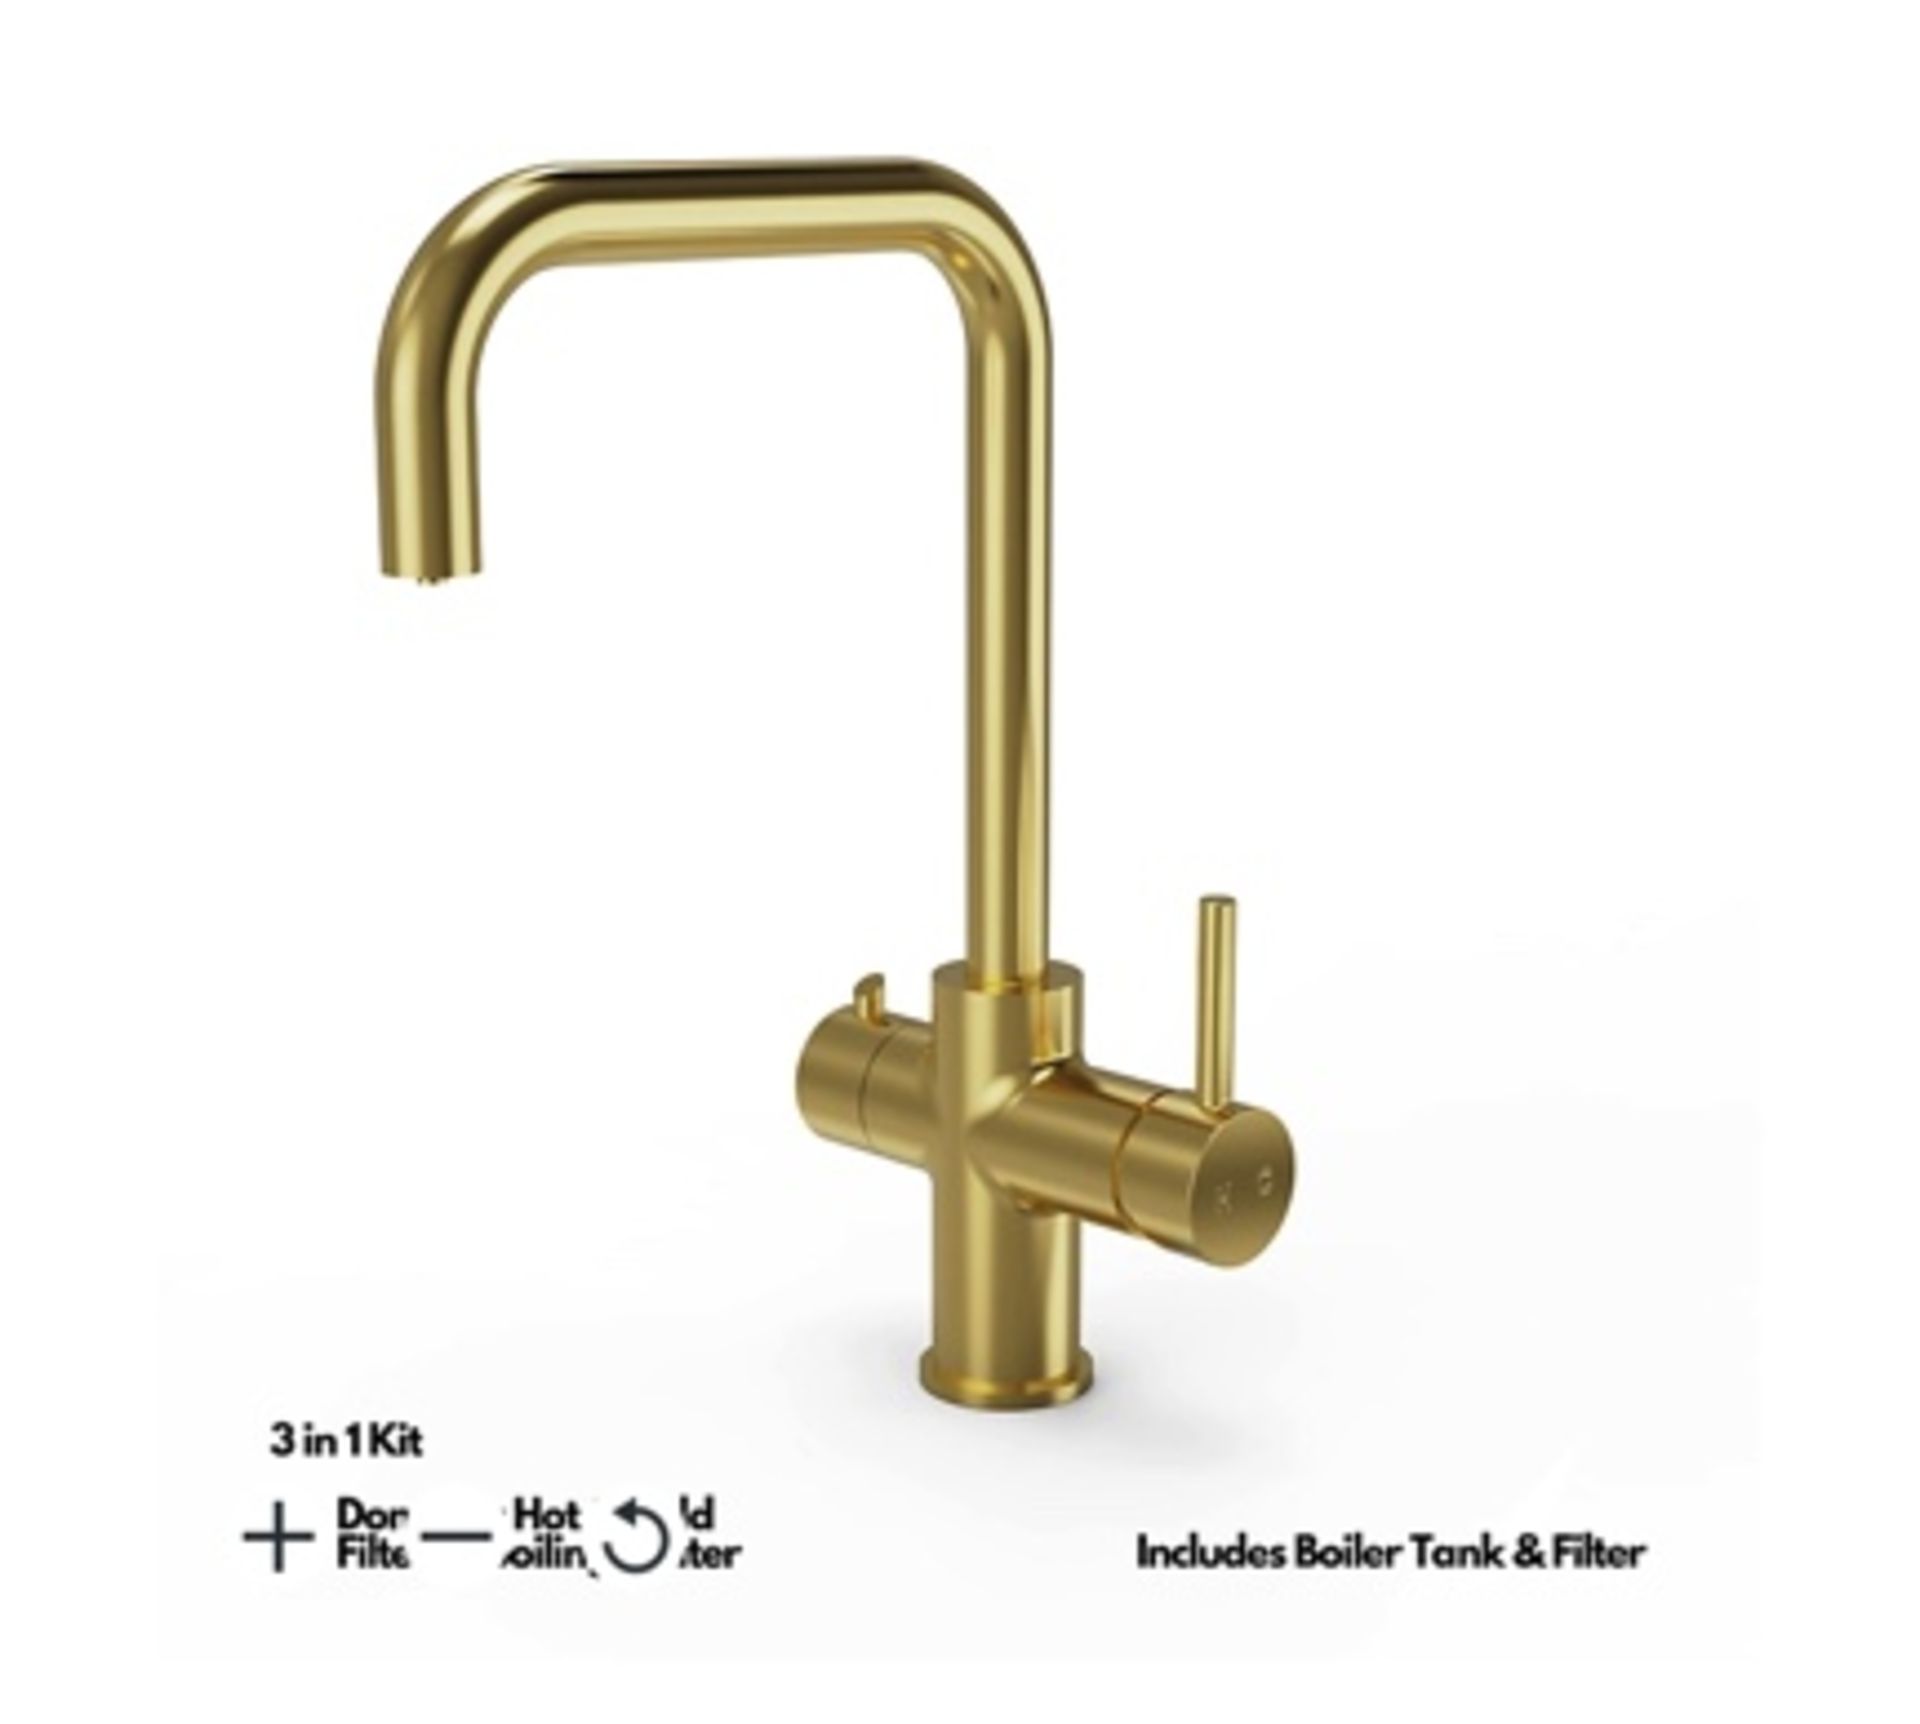 Brand New Boxed Kersin Elise Brushed Brass 3 in 1 Instant Hot Water Kit RRP £290.90 **No Vat**